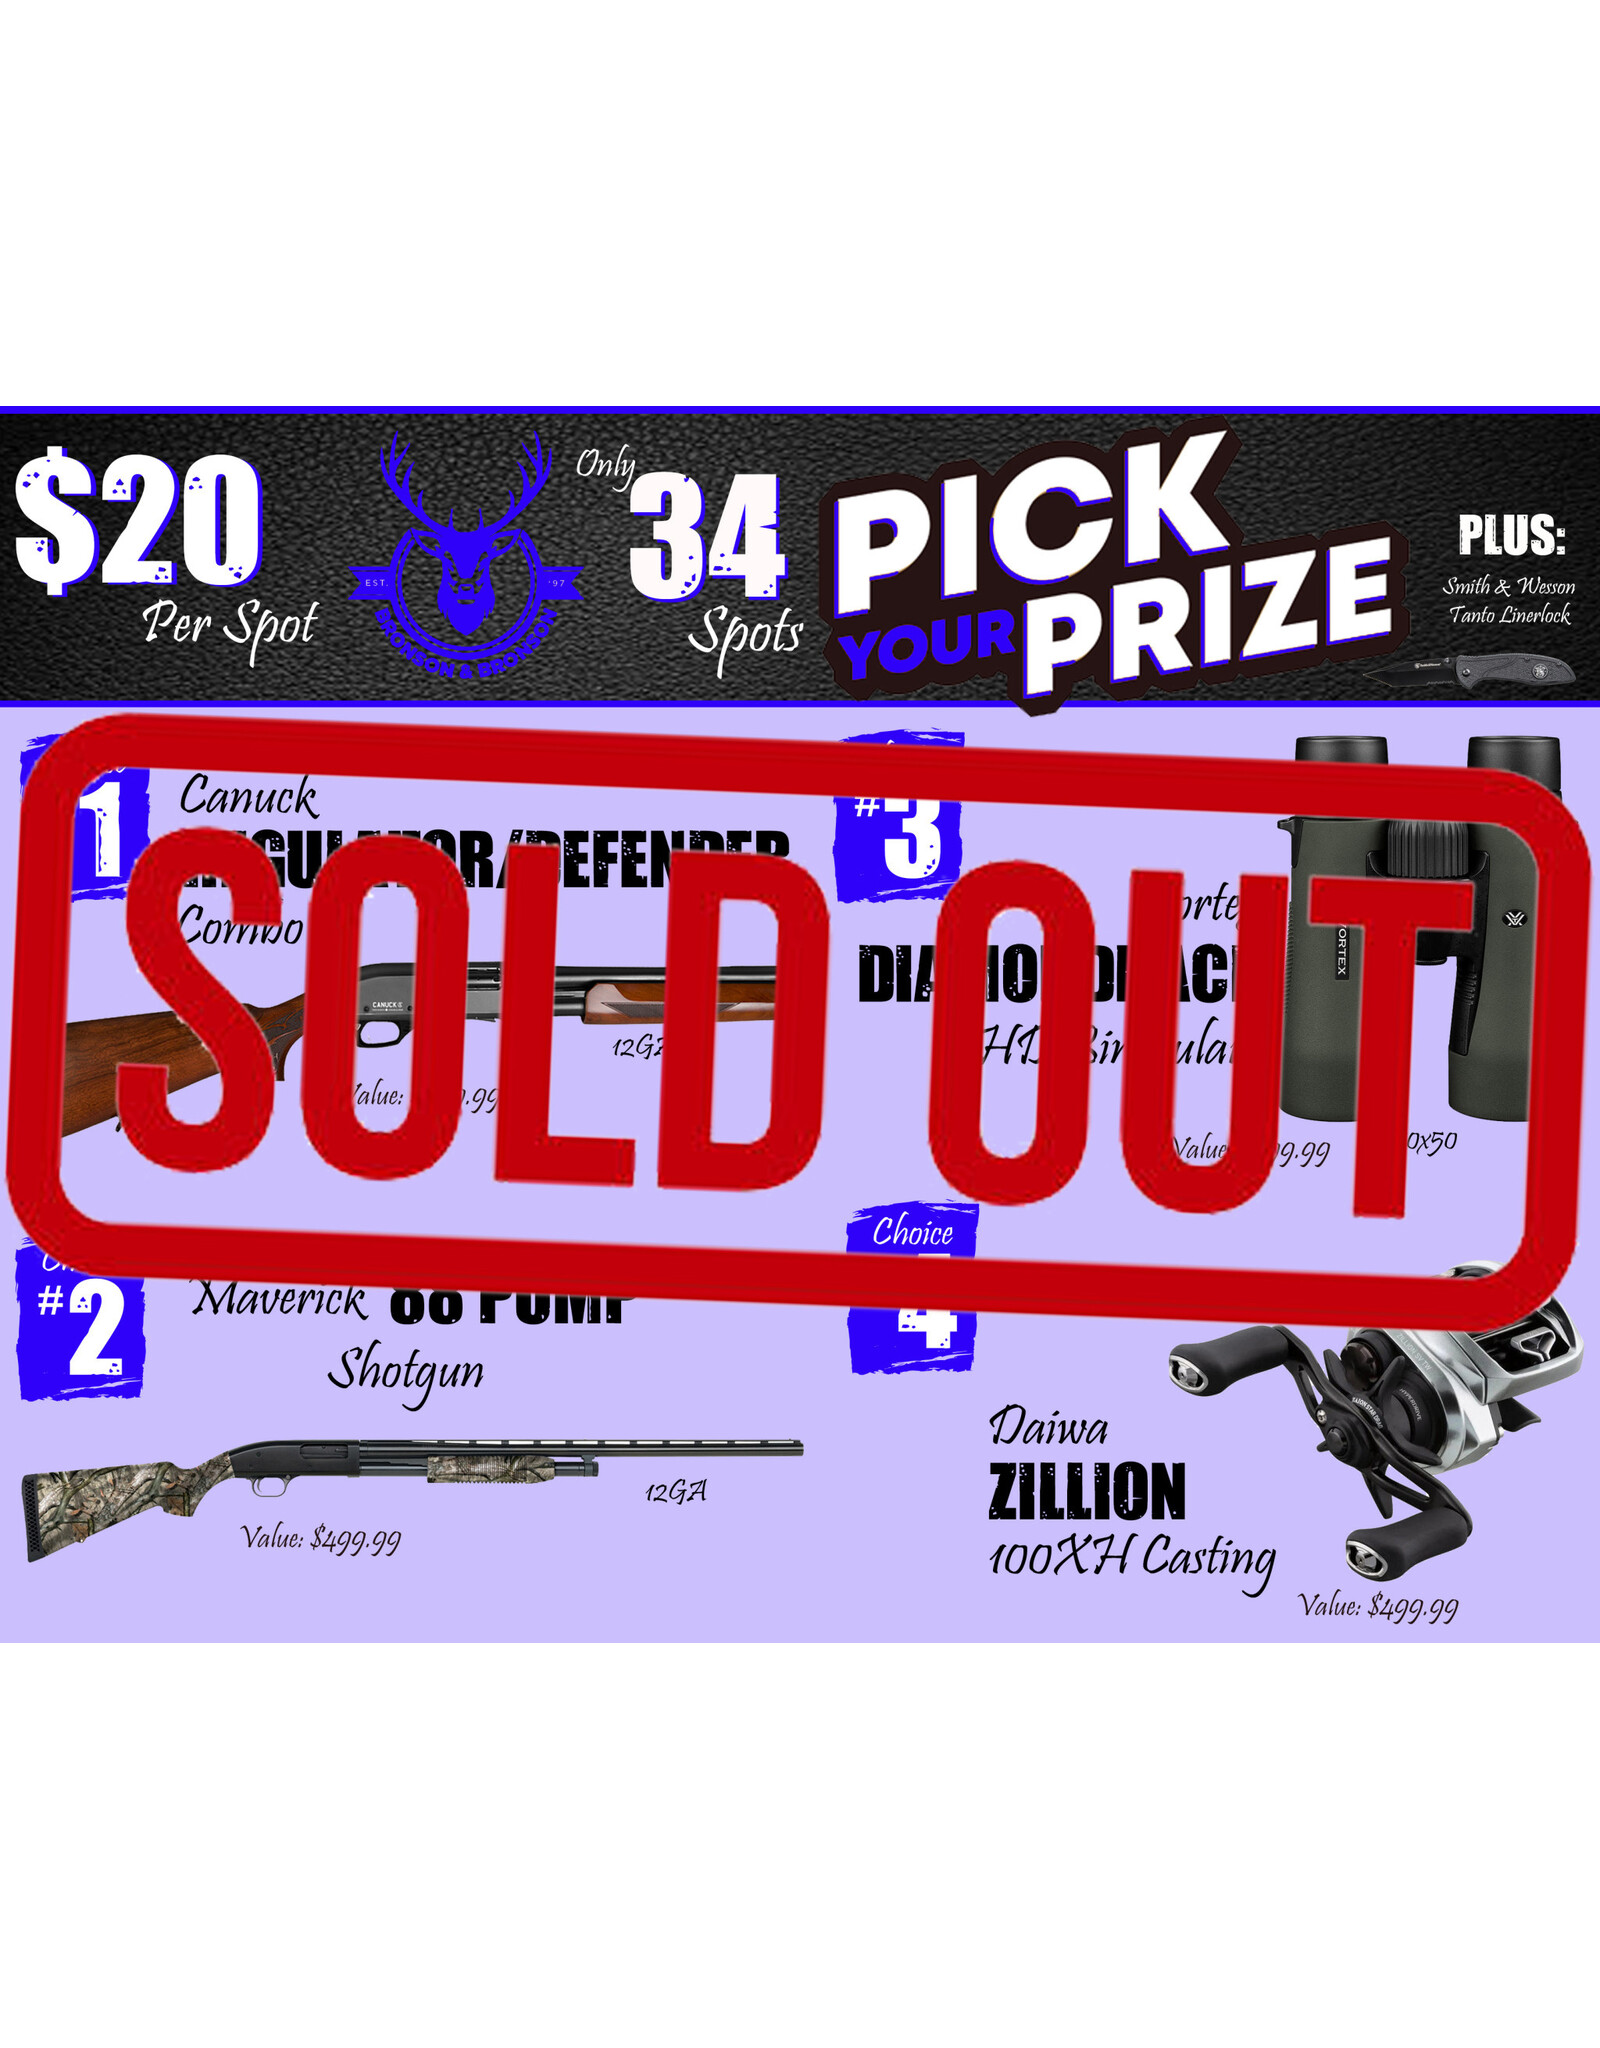 DRAW #1349 - Pick Your Prize - Canuck, Mossberg, Vortex OR Daiwa